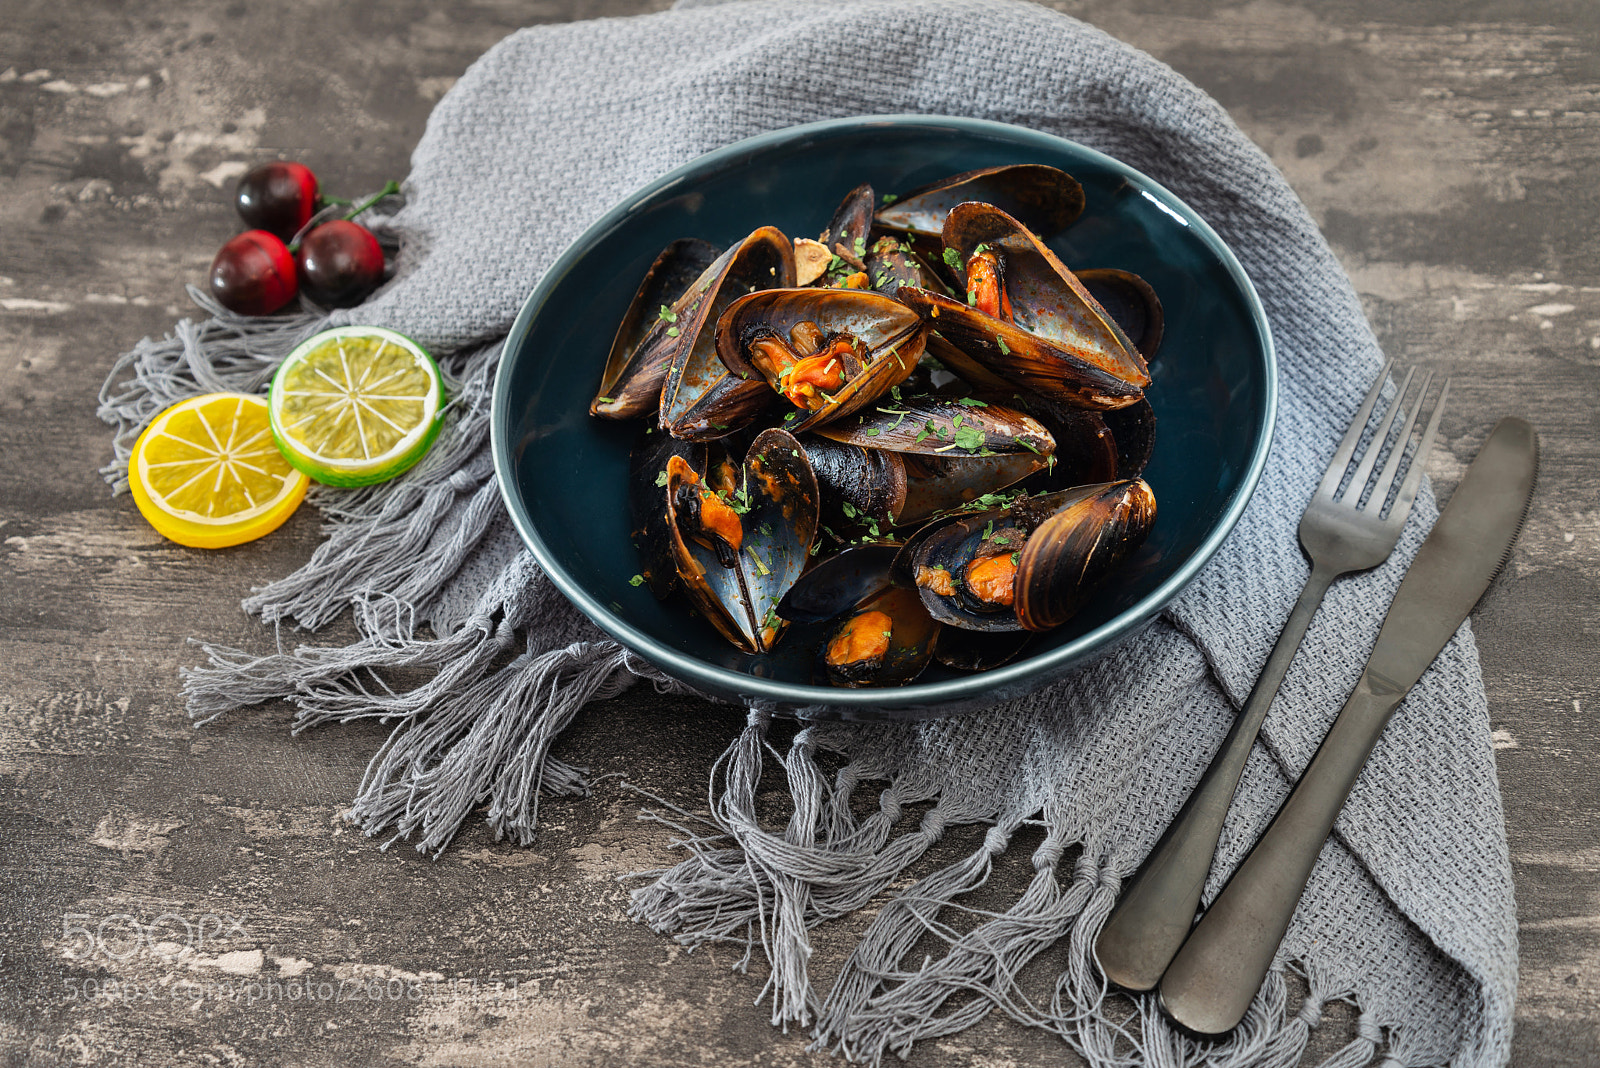 Nikon D800 sample photo. Italian steamed mussels cooked photography